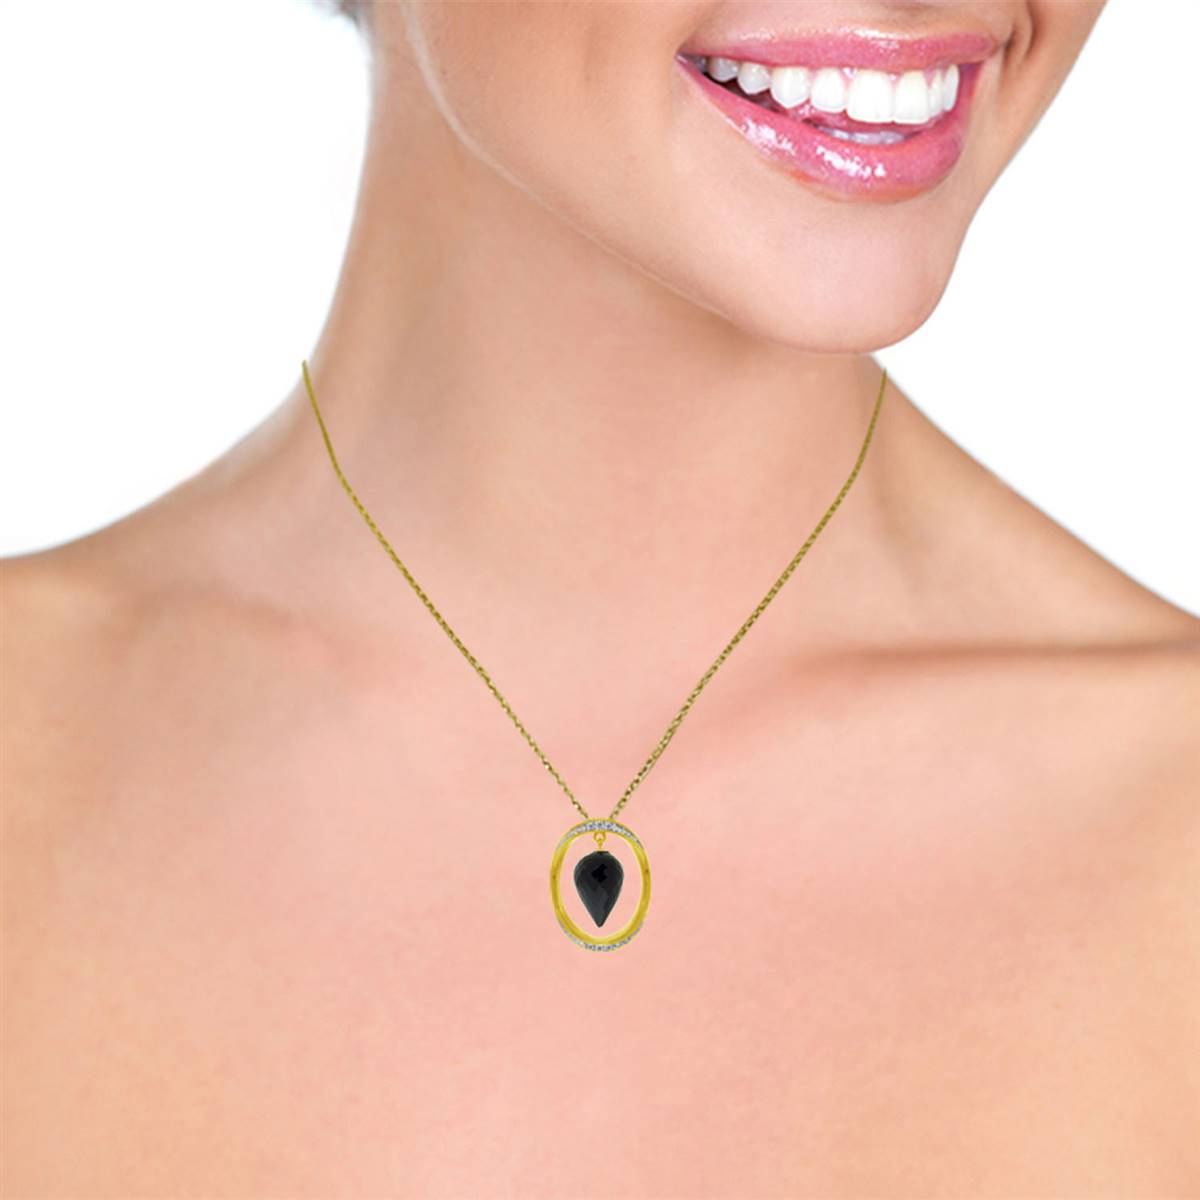 14K Solid Yellow Gold Necklace w/ Diamonds & Briolette Pointy Drop Black Spinel